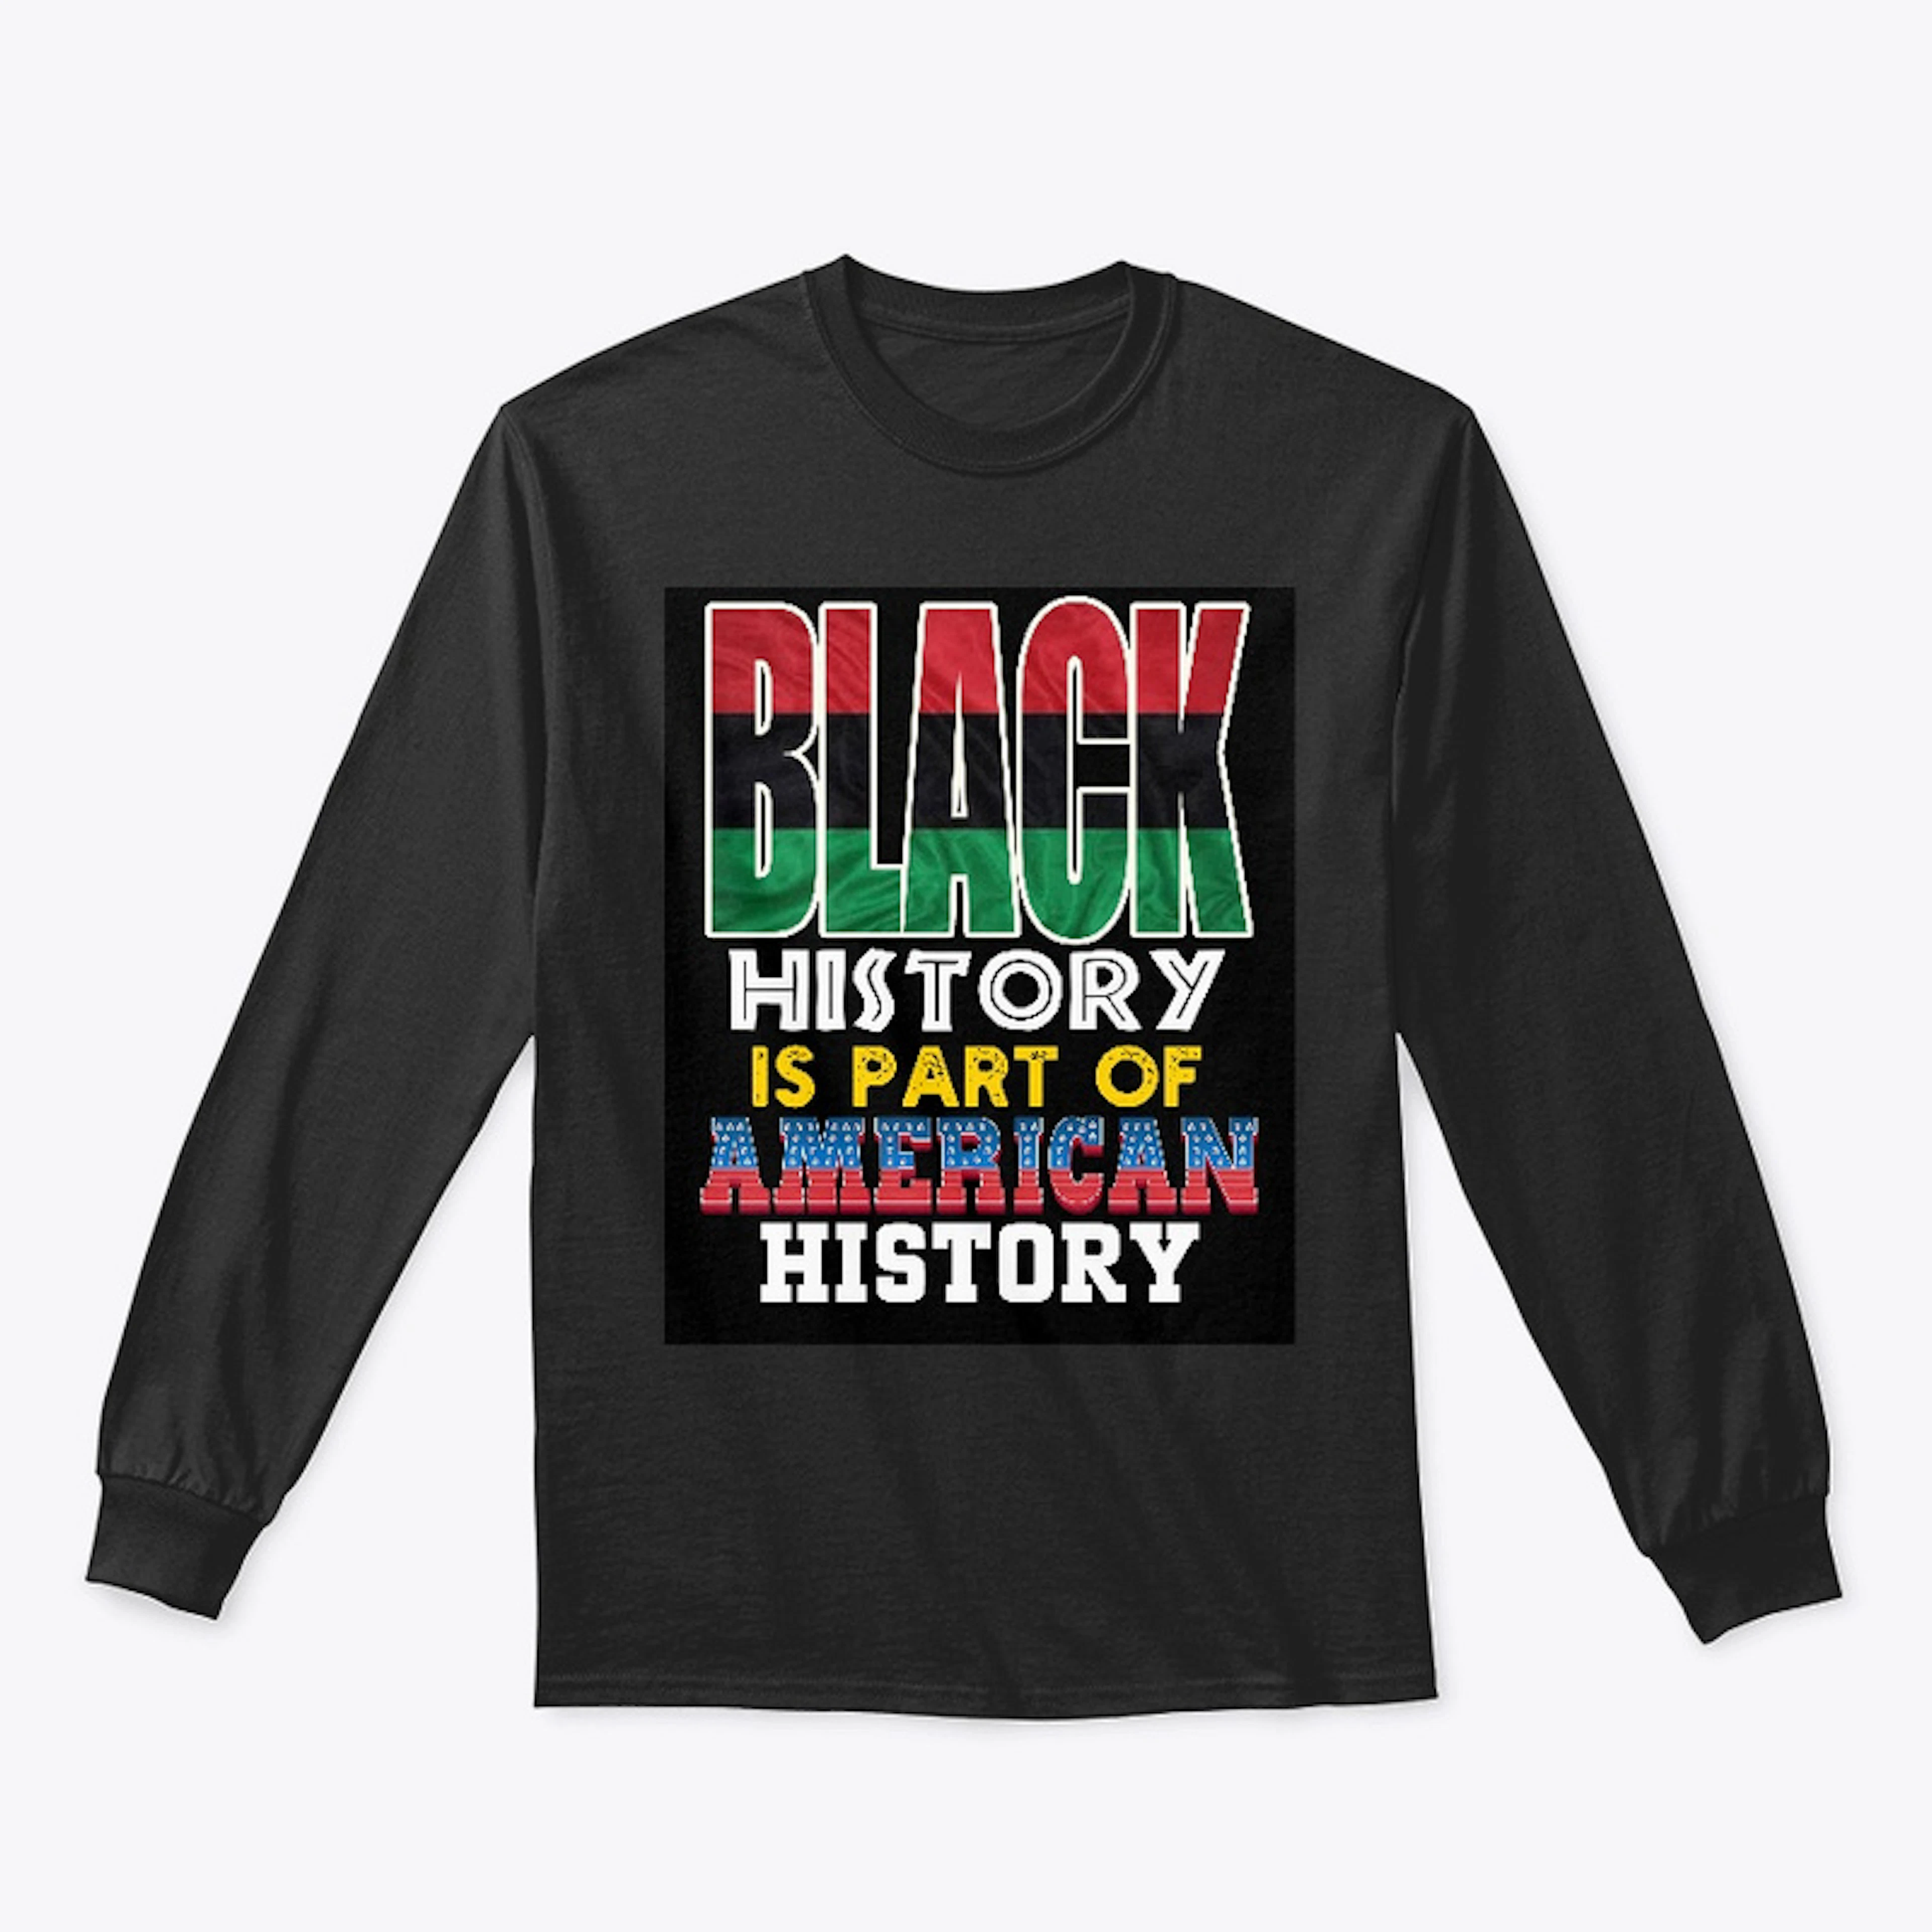 Black history s part of American history